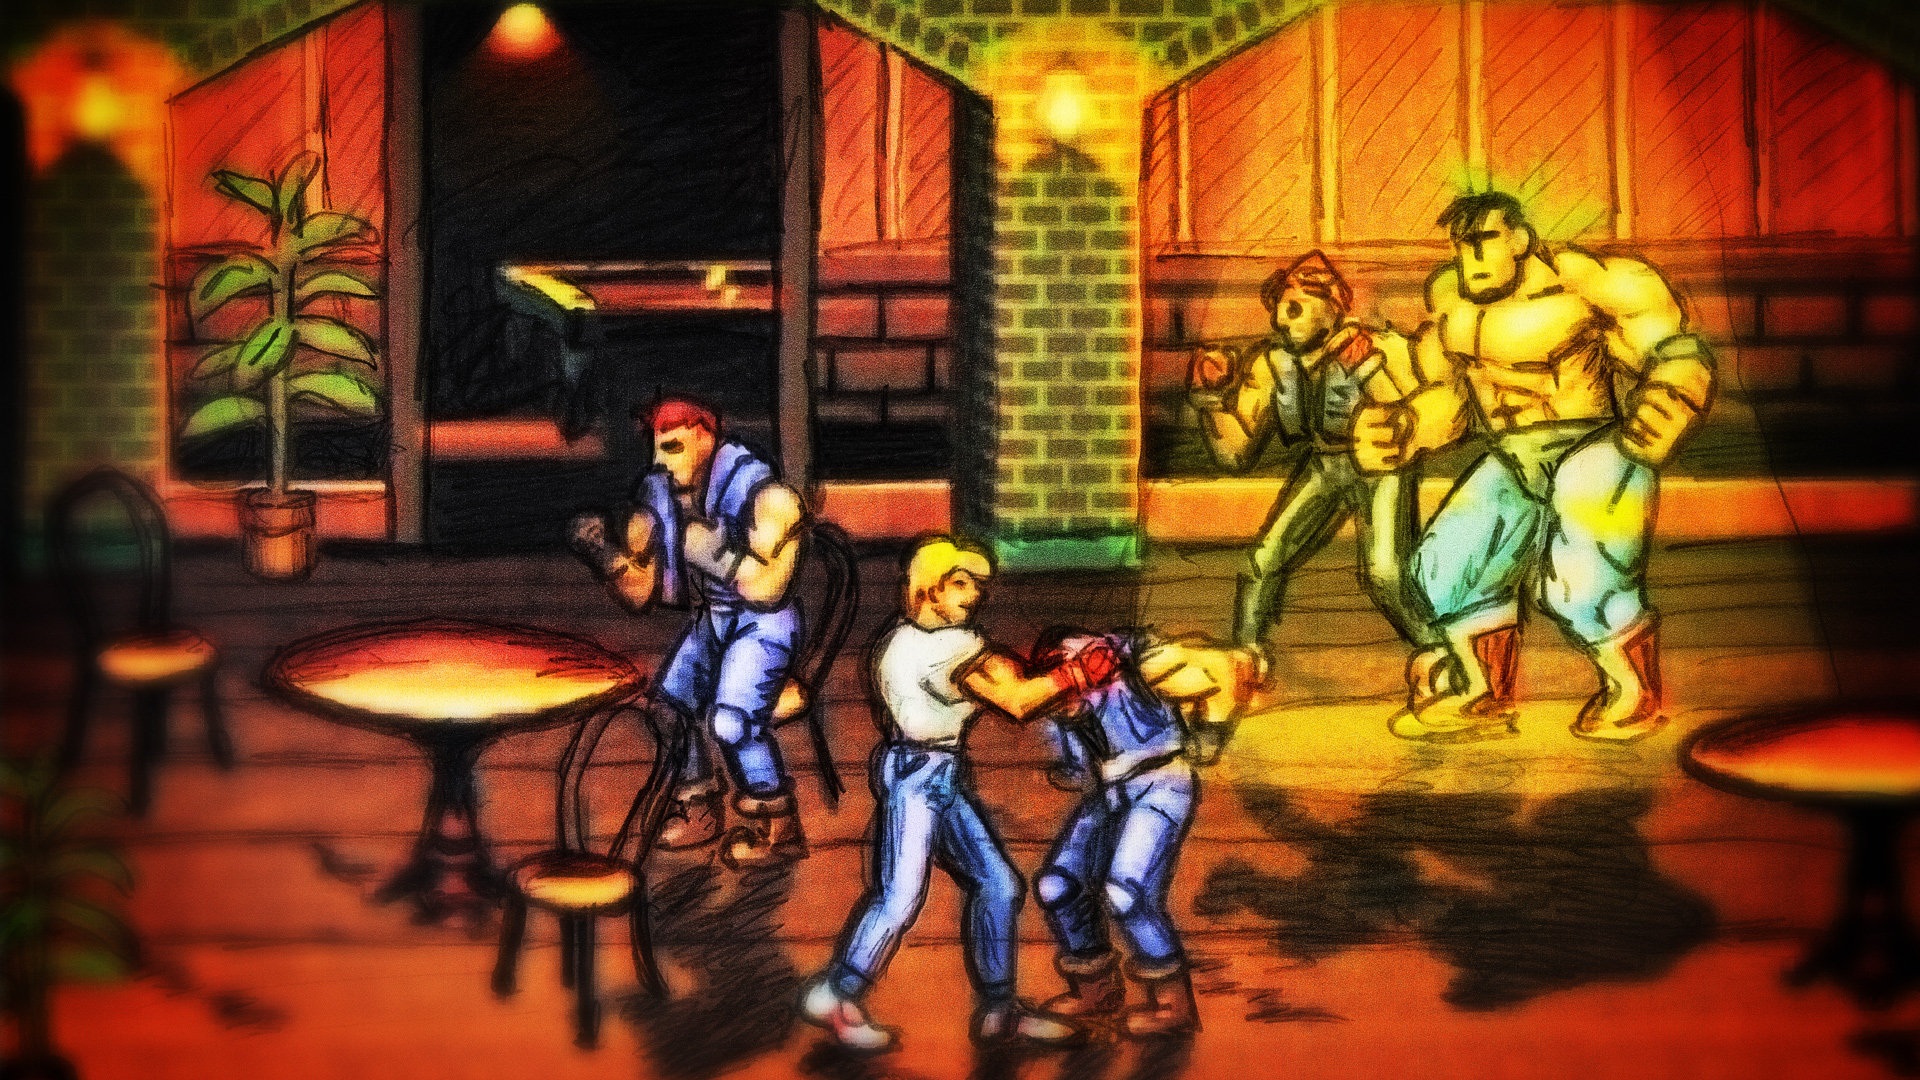 Streets of Rage 3 Images. 